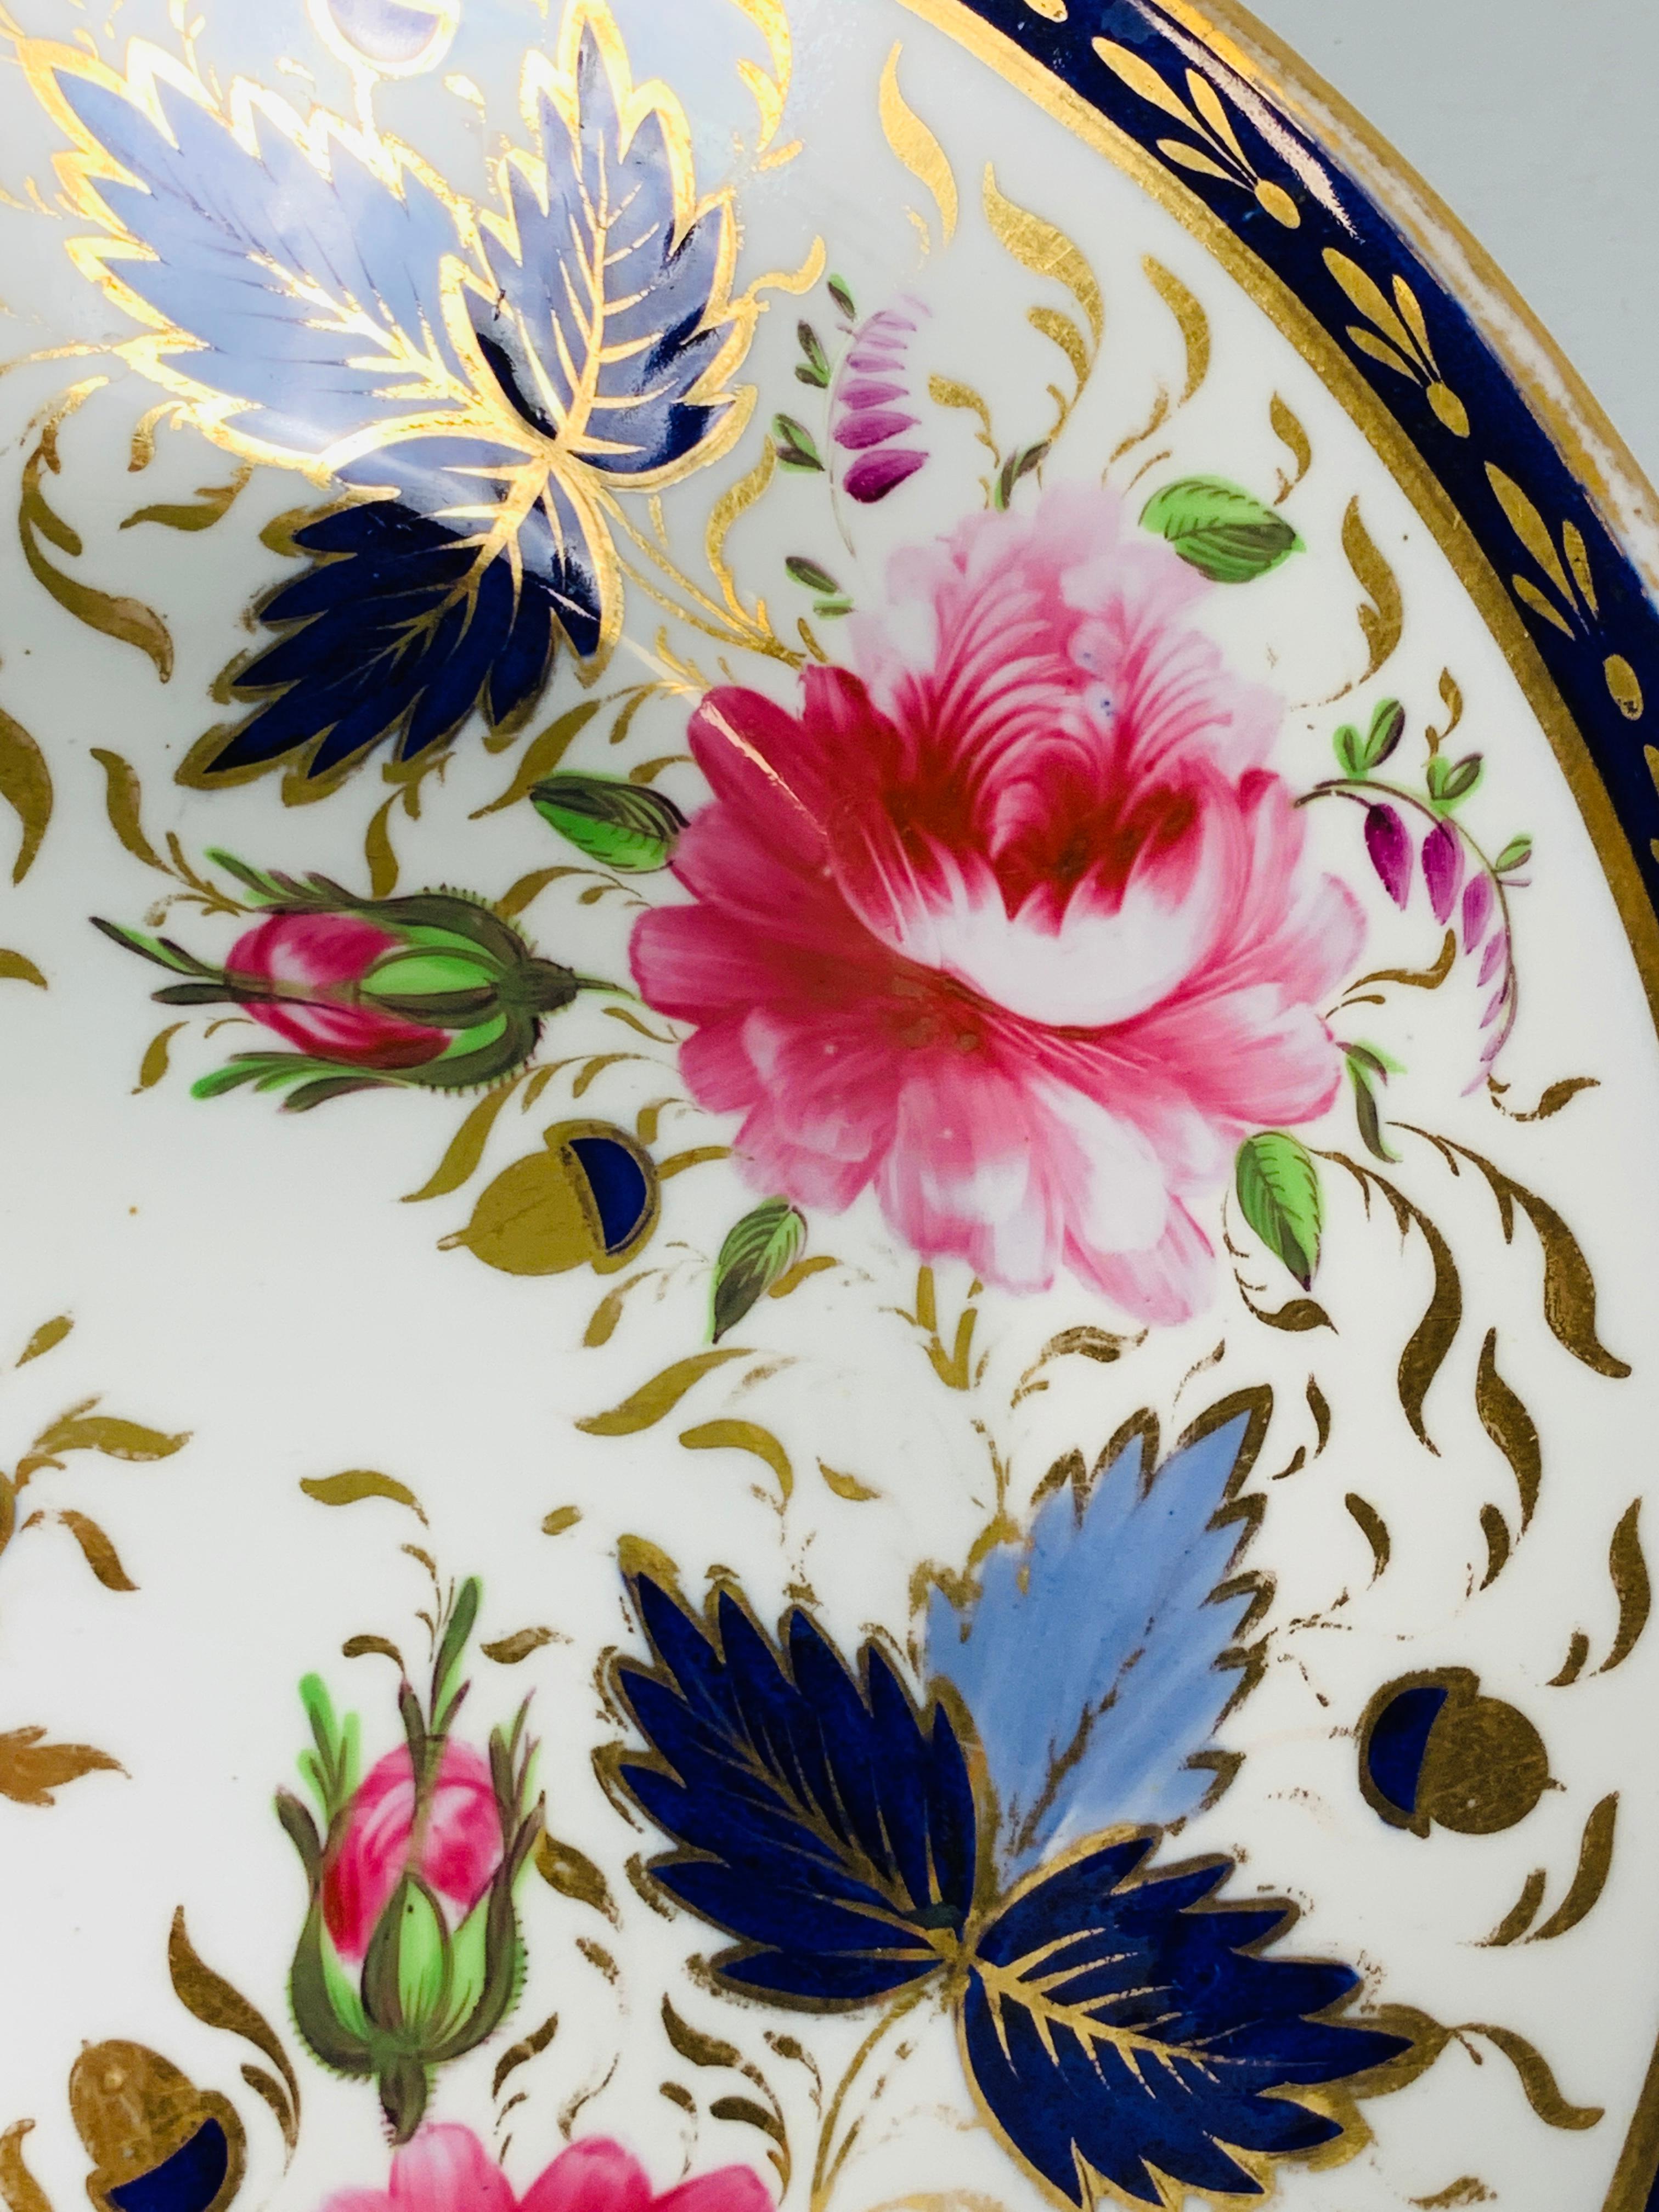 Provenance: The Private Collection of Mario Buatta
A Staffordshire Saucer dish made in England, circa 1830.
Mario loved flowers, and he loved well-painted flowers on porcelain.
This saucer dish is hand painted with delightful pink peonies